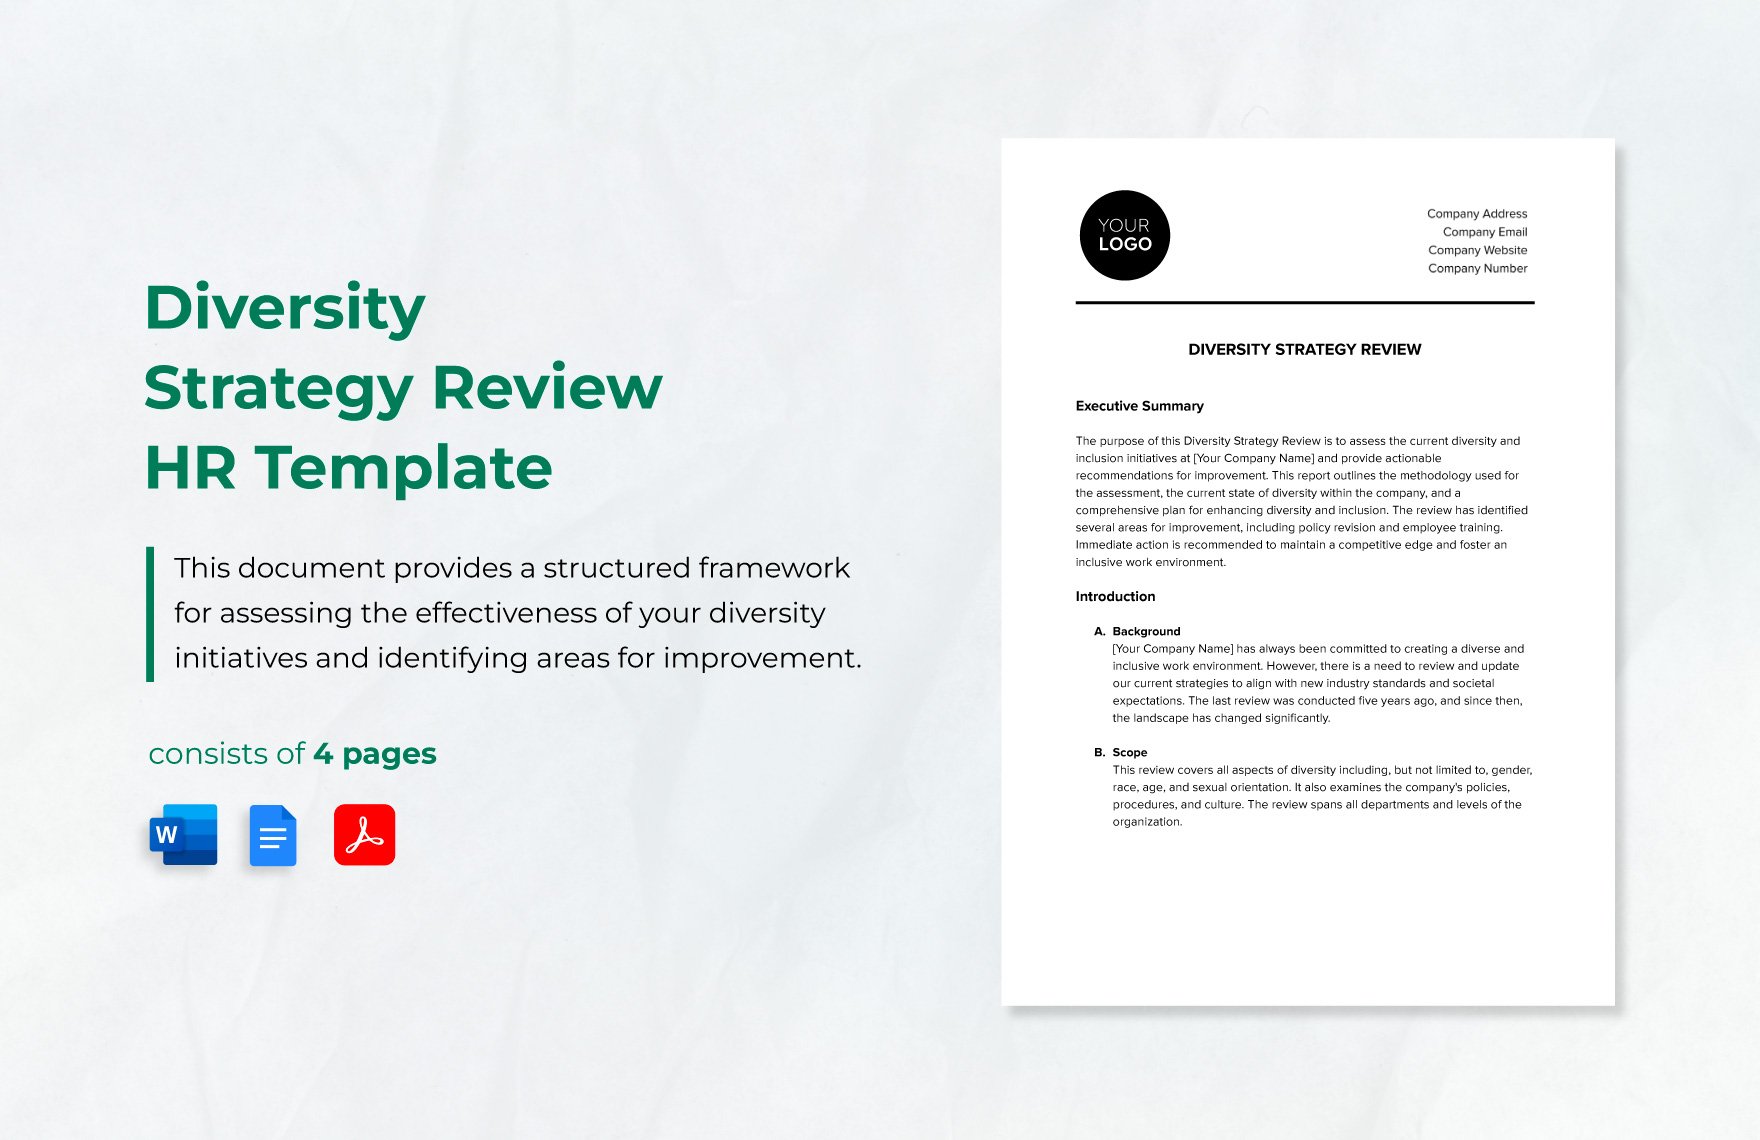 Diversity Strategy Review HR Template